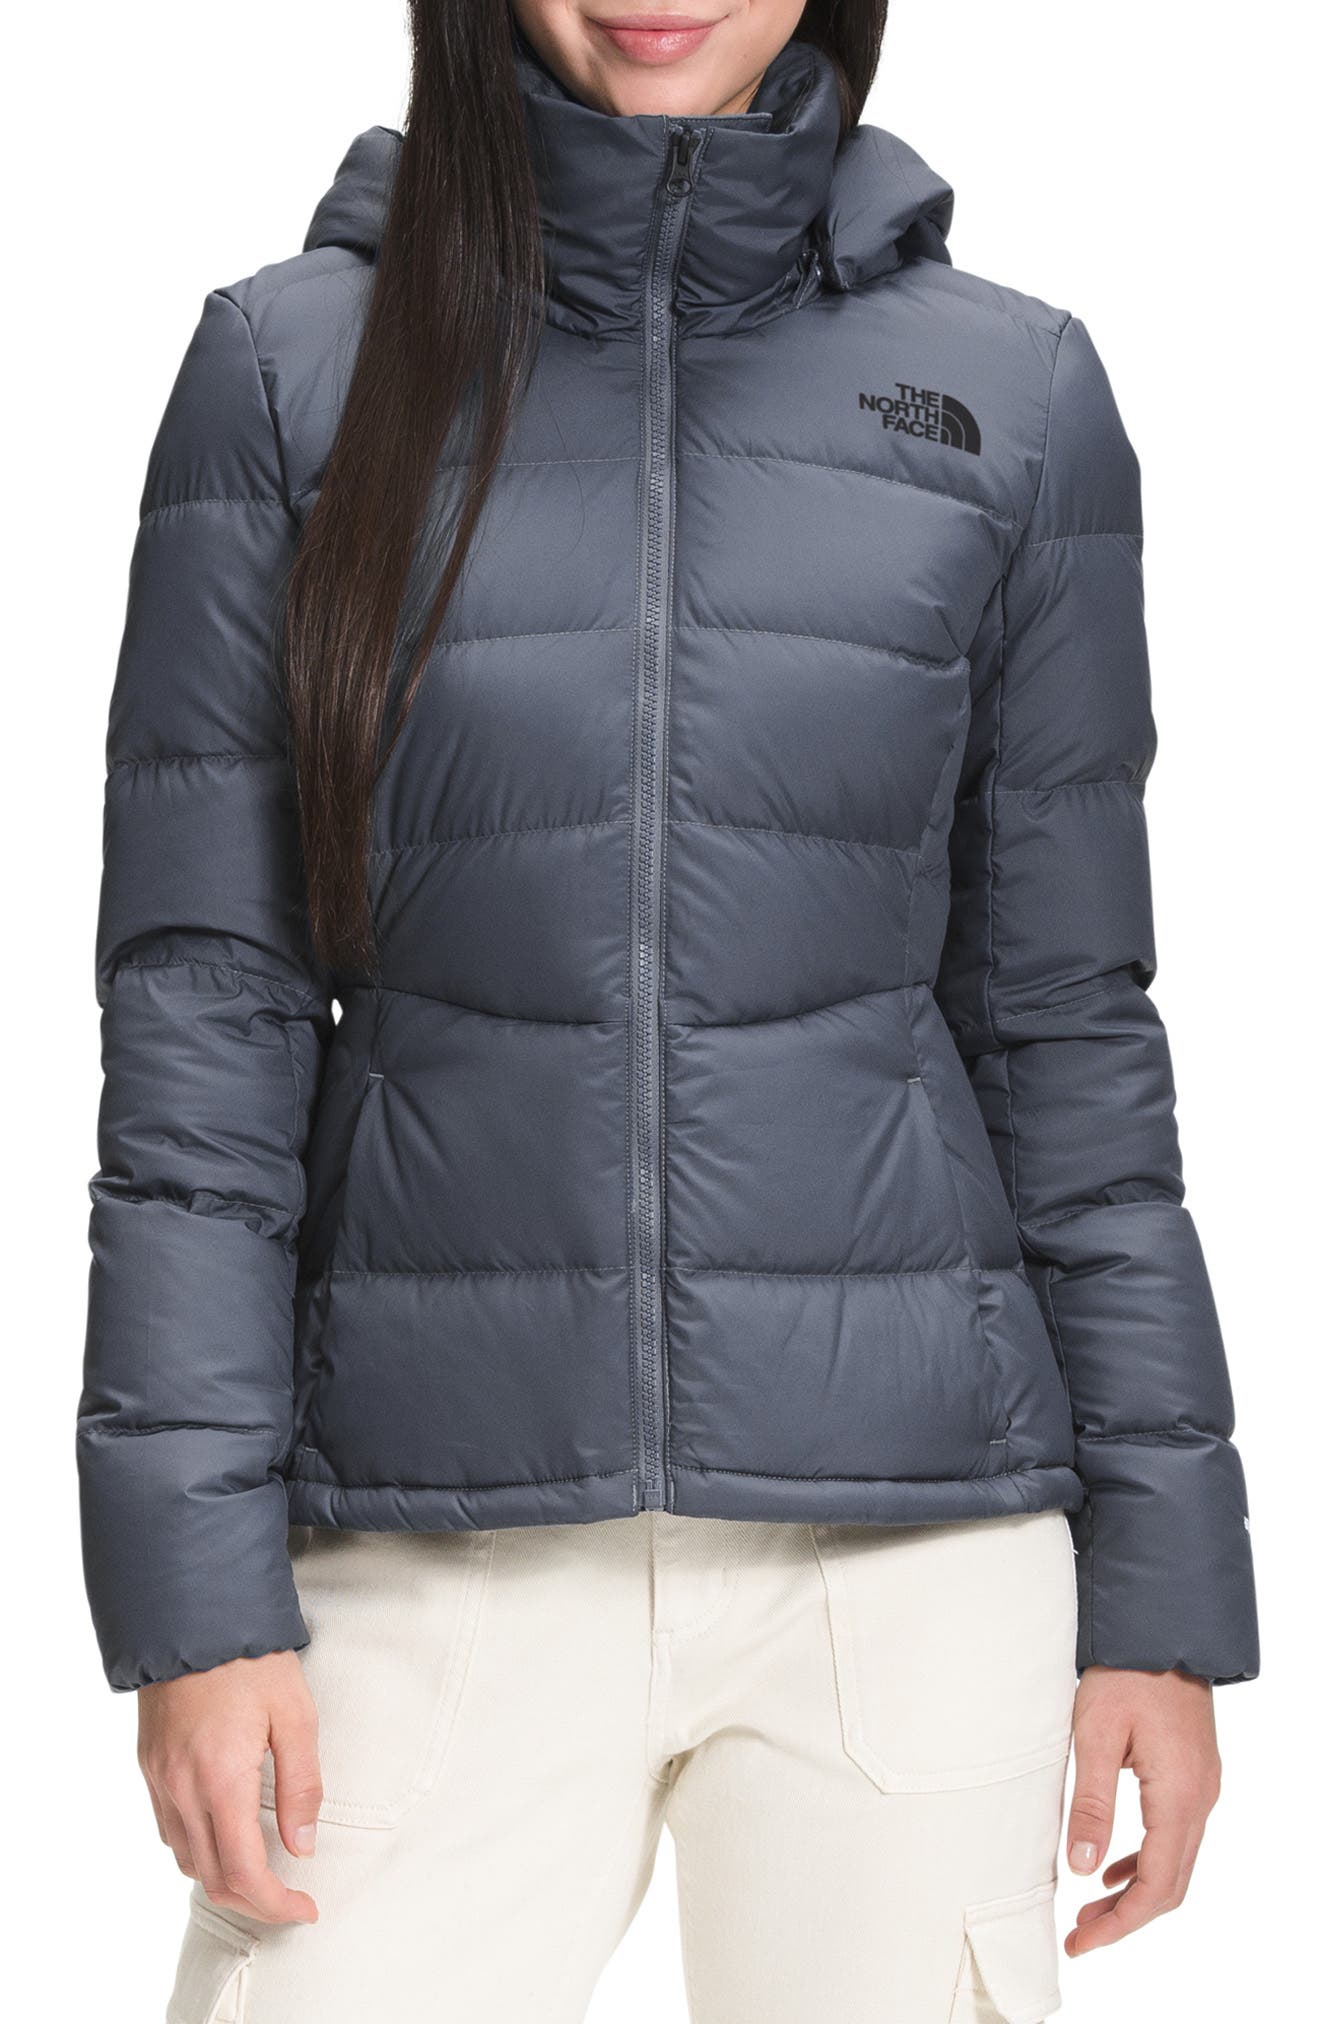 north face 550 jacket womens